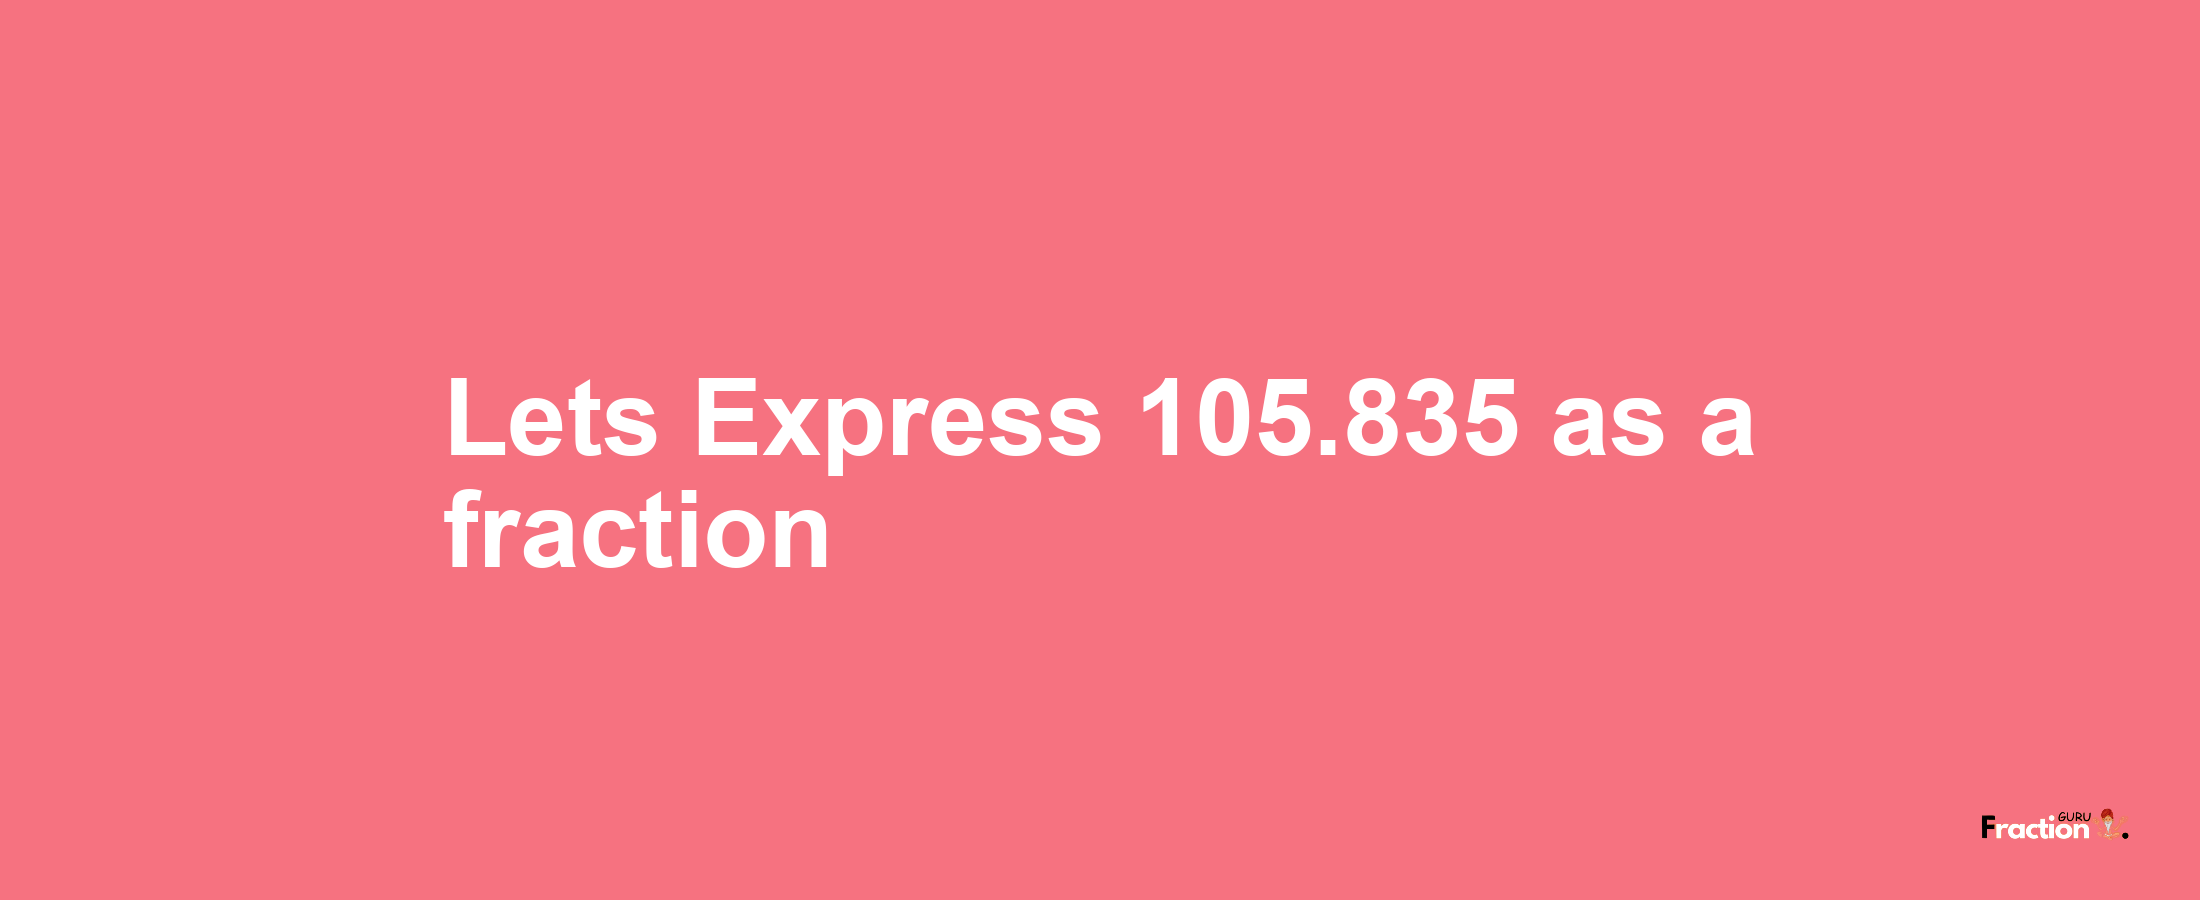 Lets Express 105.835 as afraction